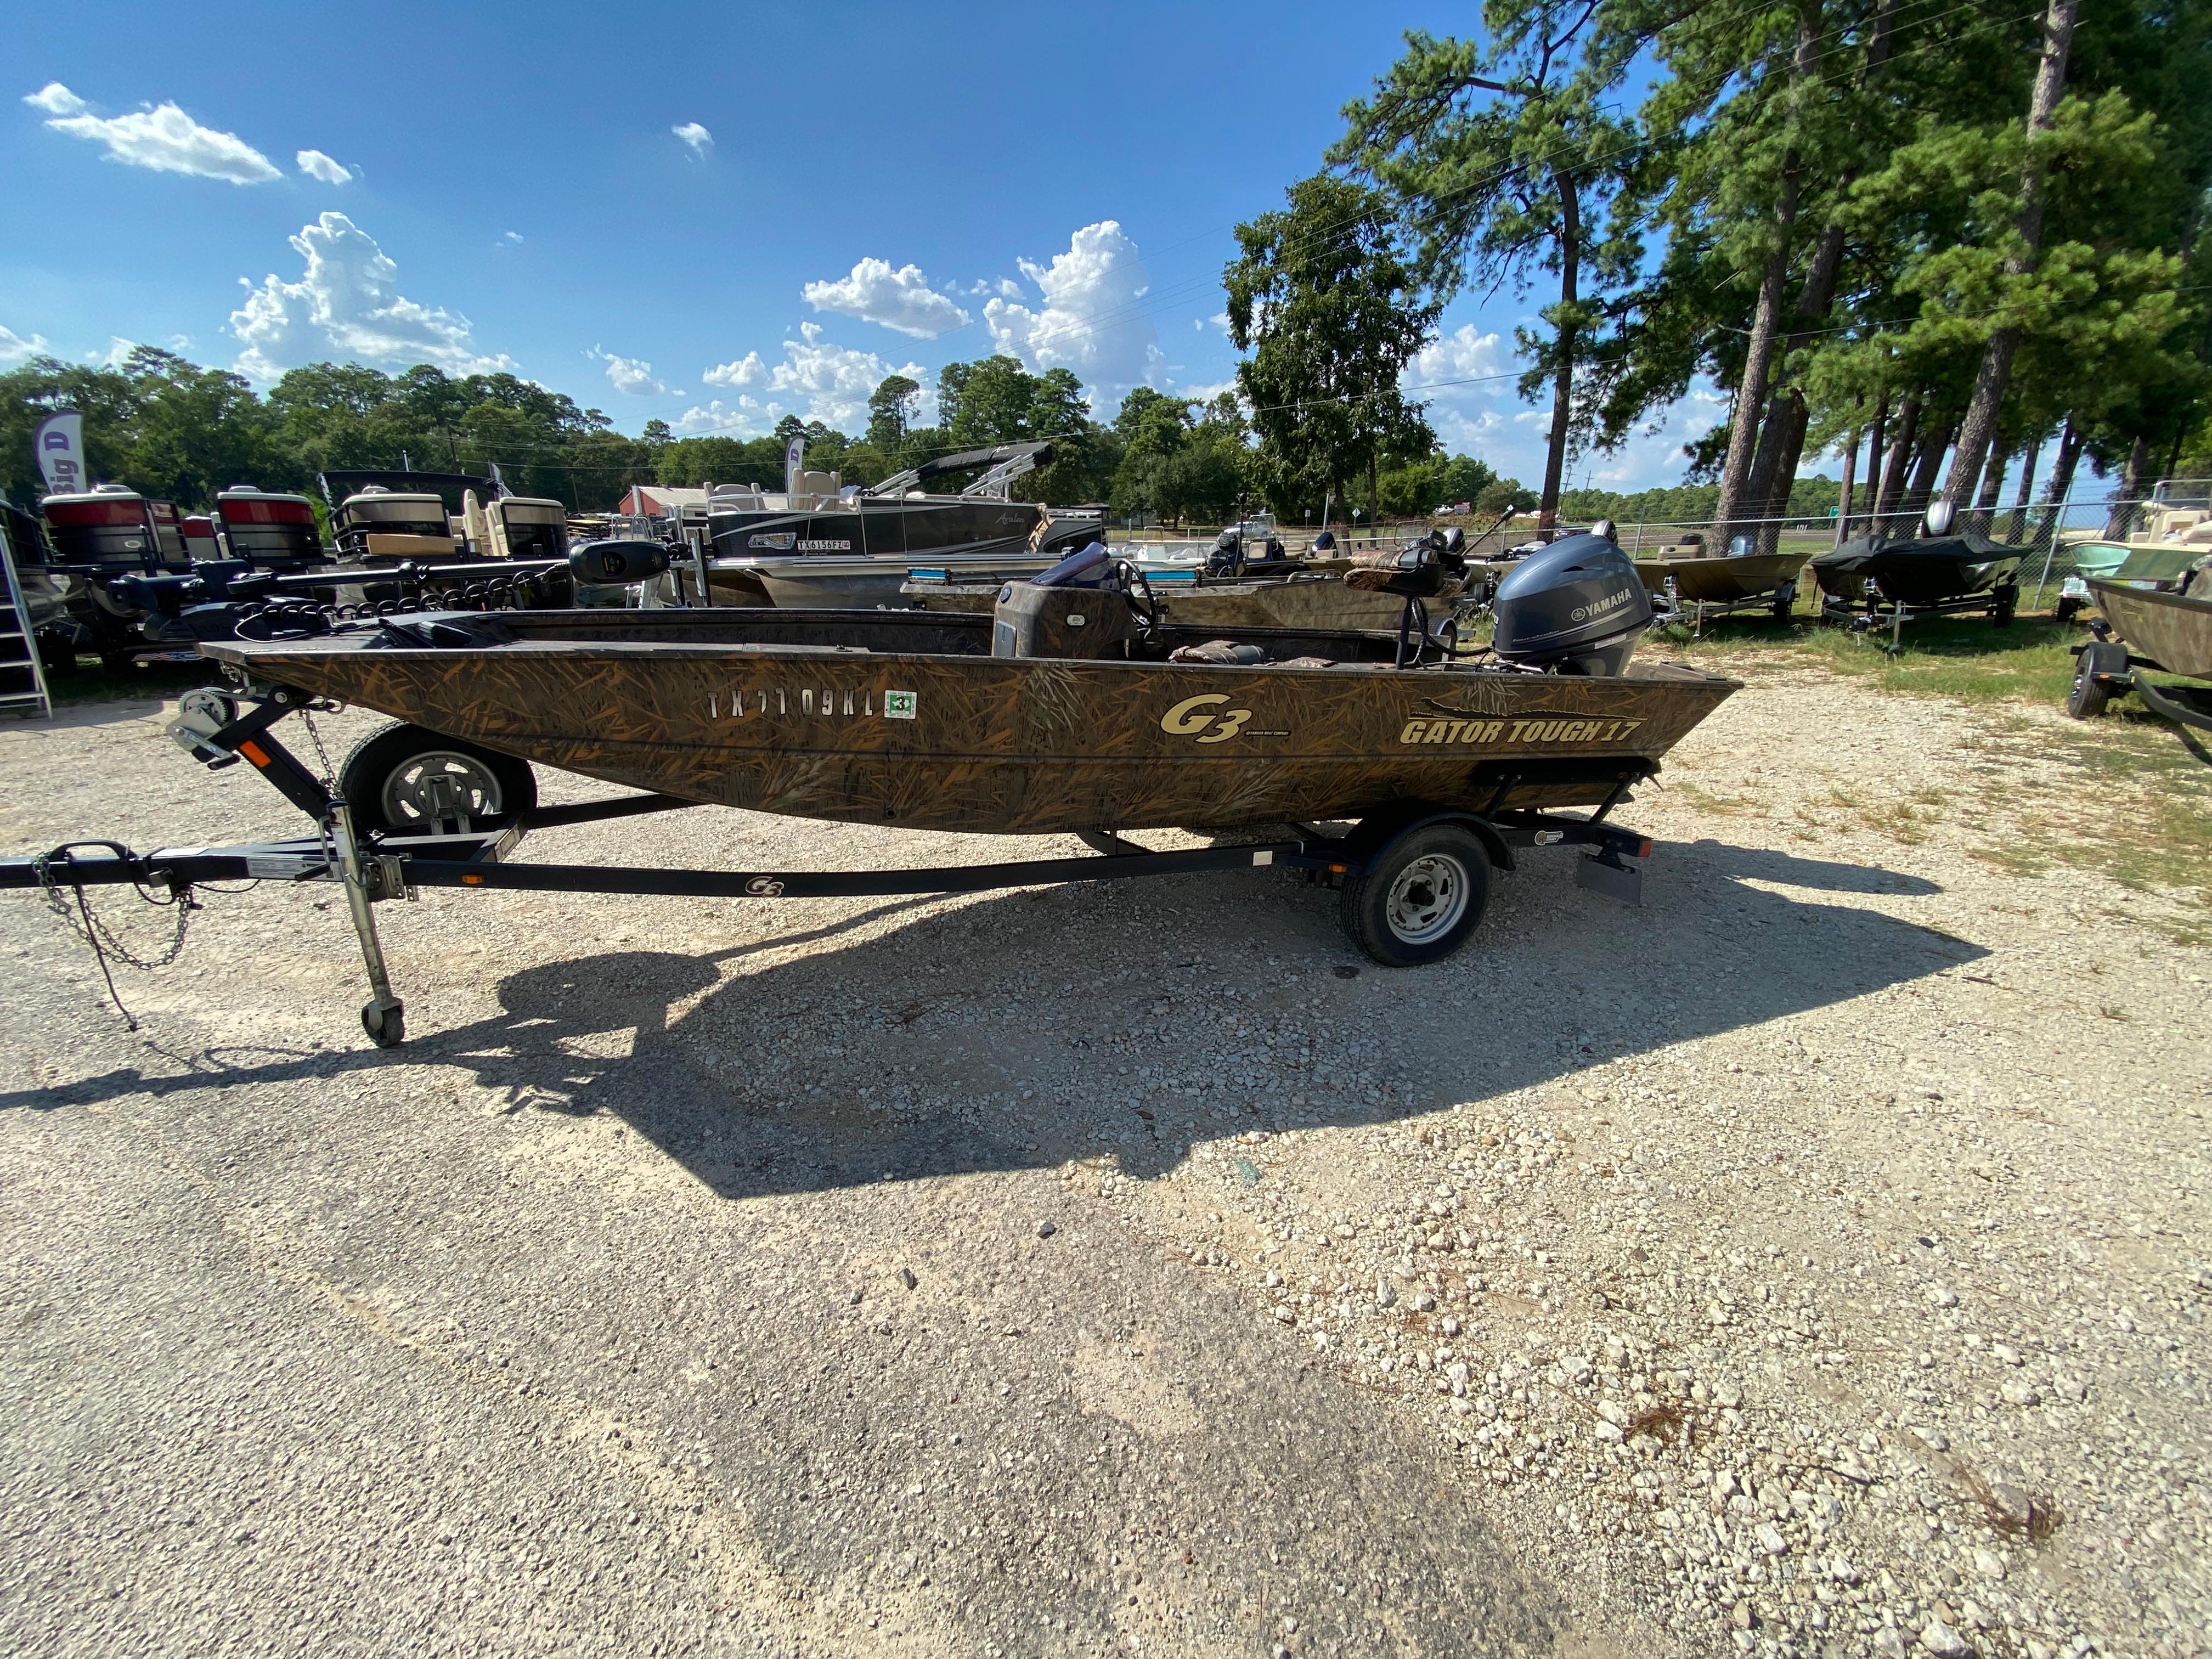 Pro-Drive boats for sale - Boat Trader